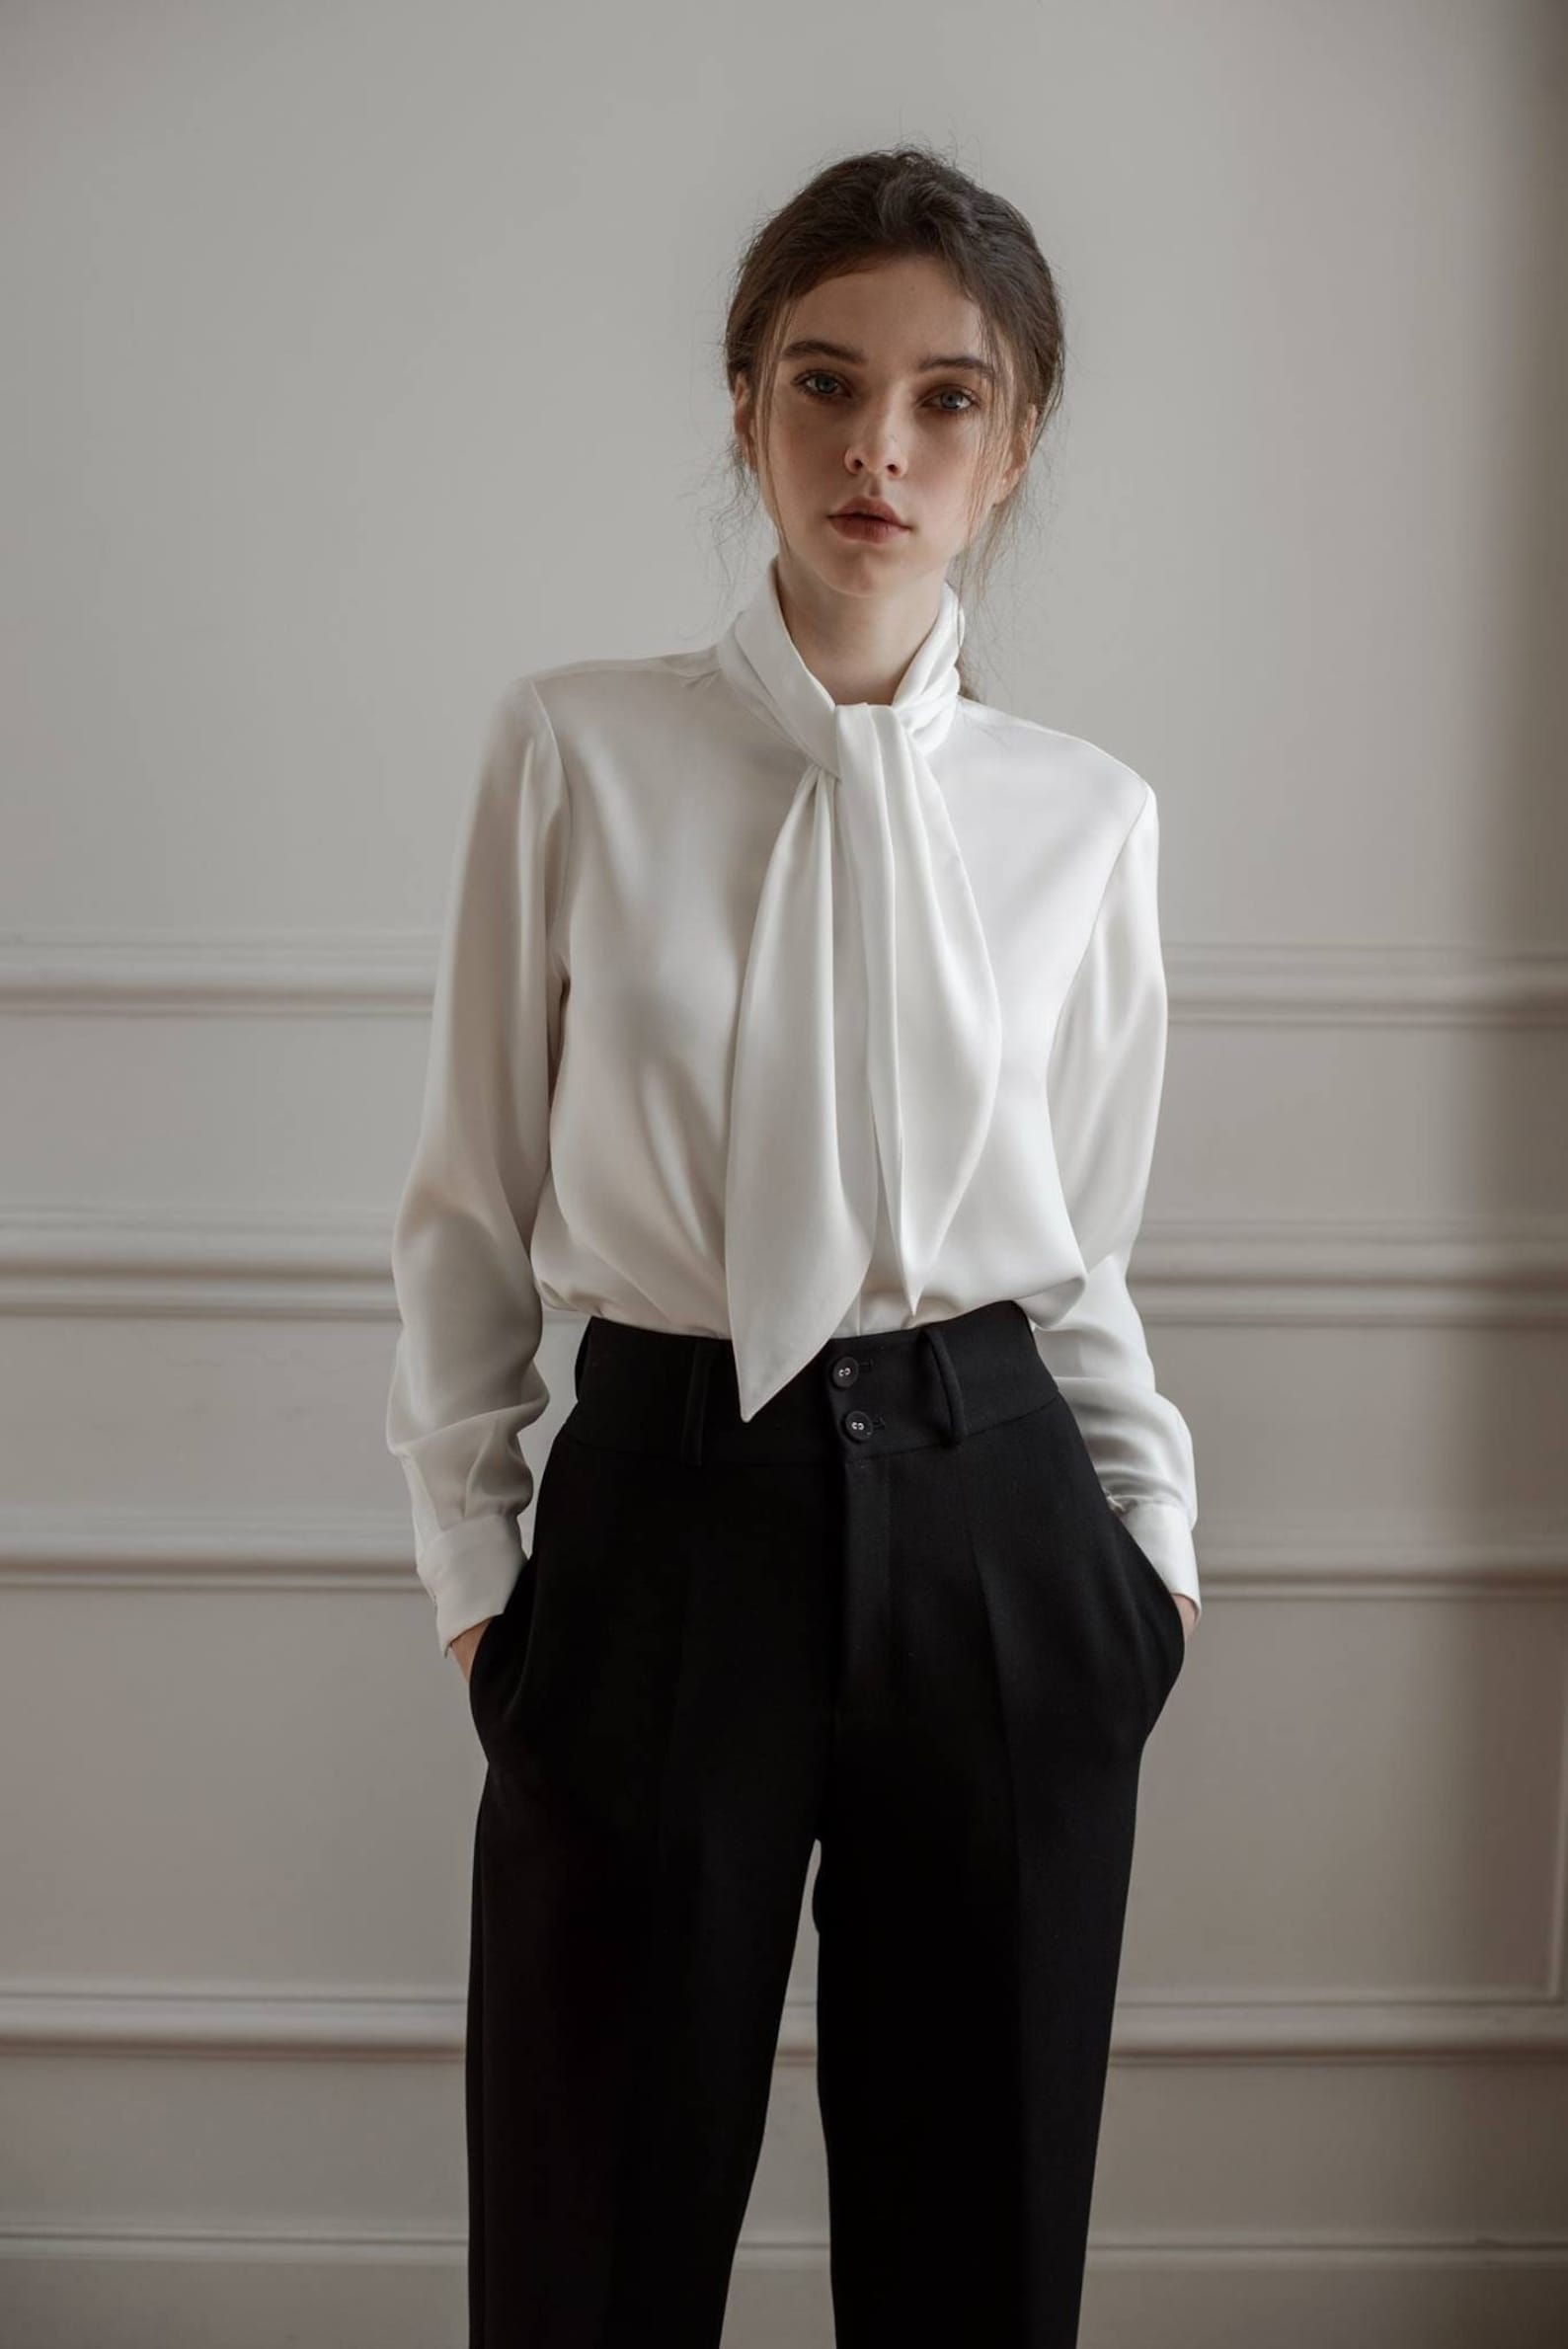 Masterpieces with Minimal Materials: How to Look Sleek with Minimalist Casual Outfits